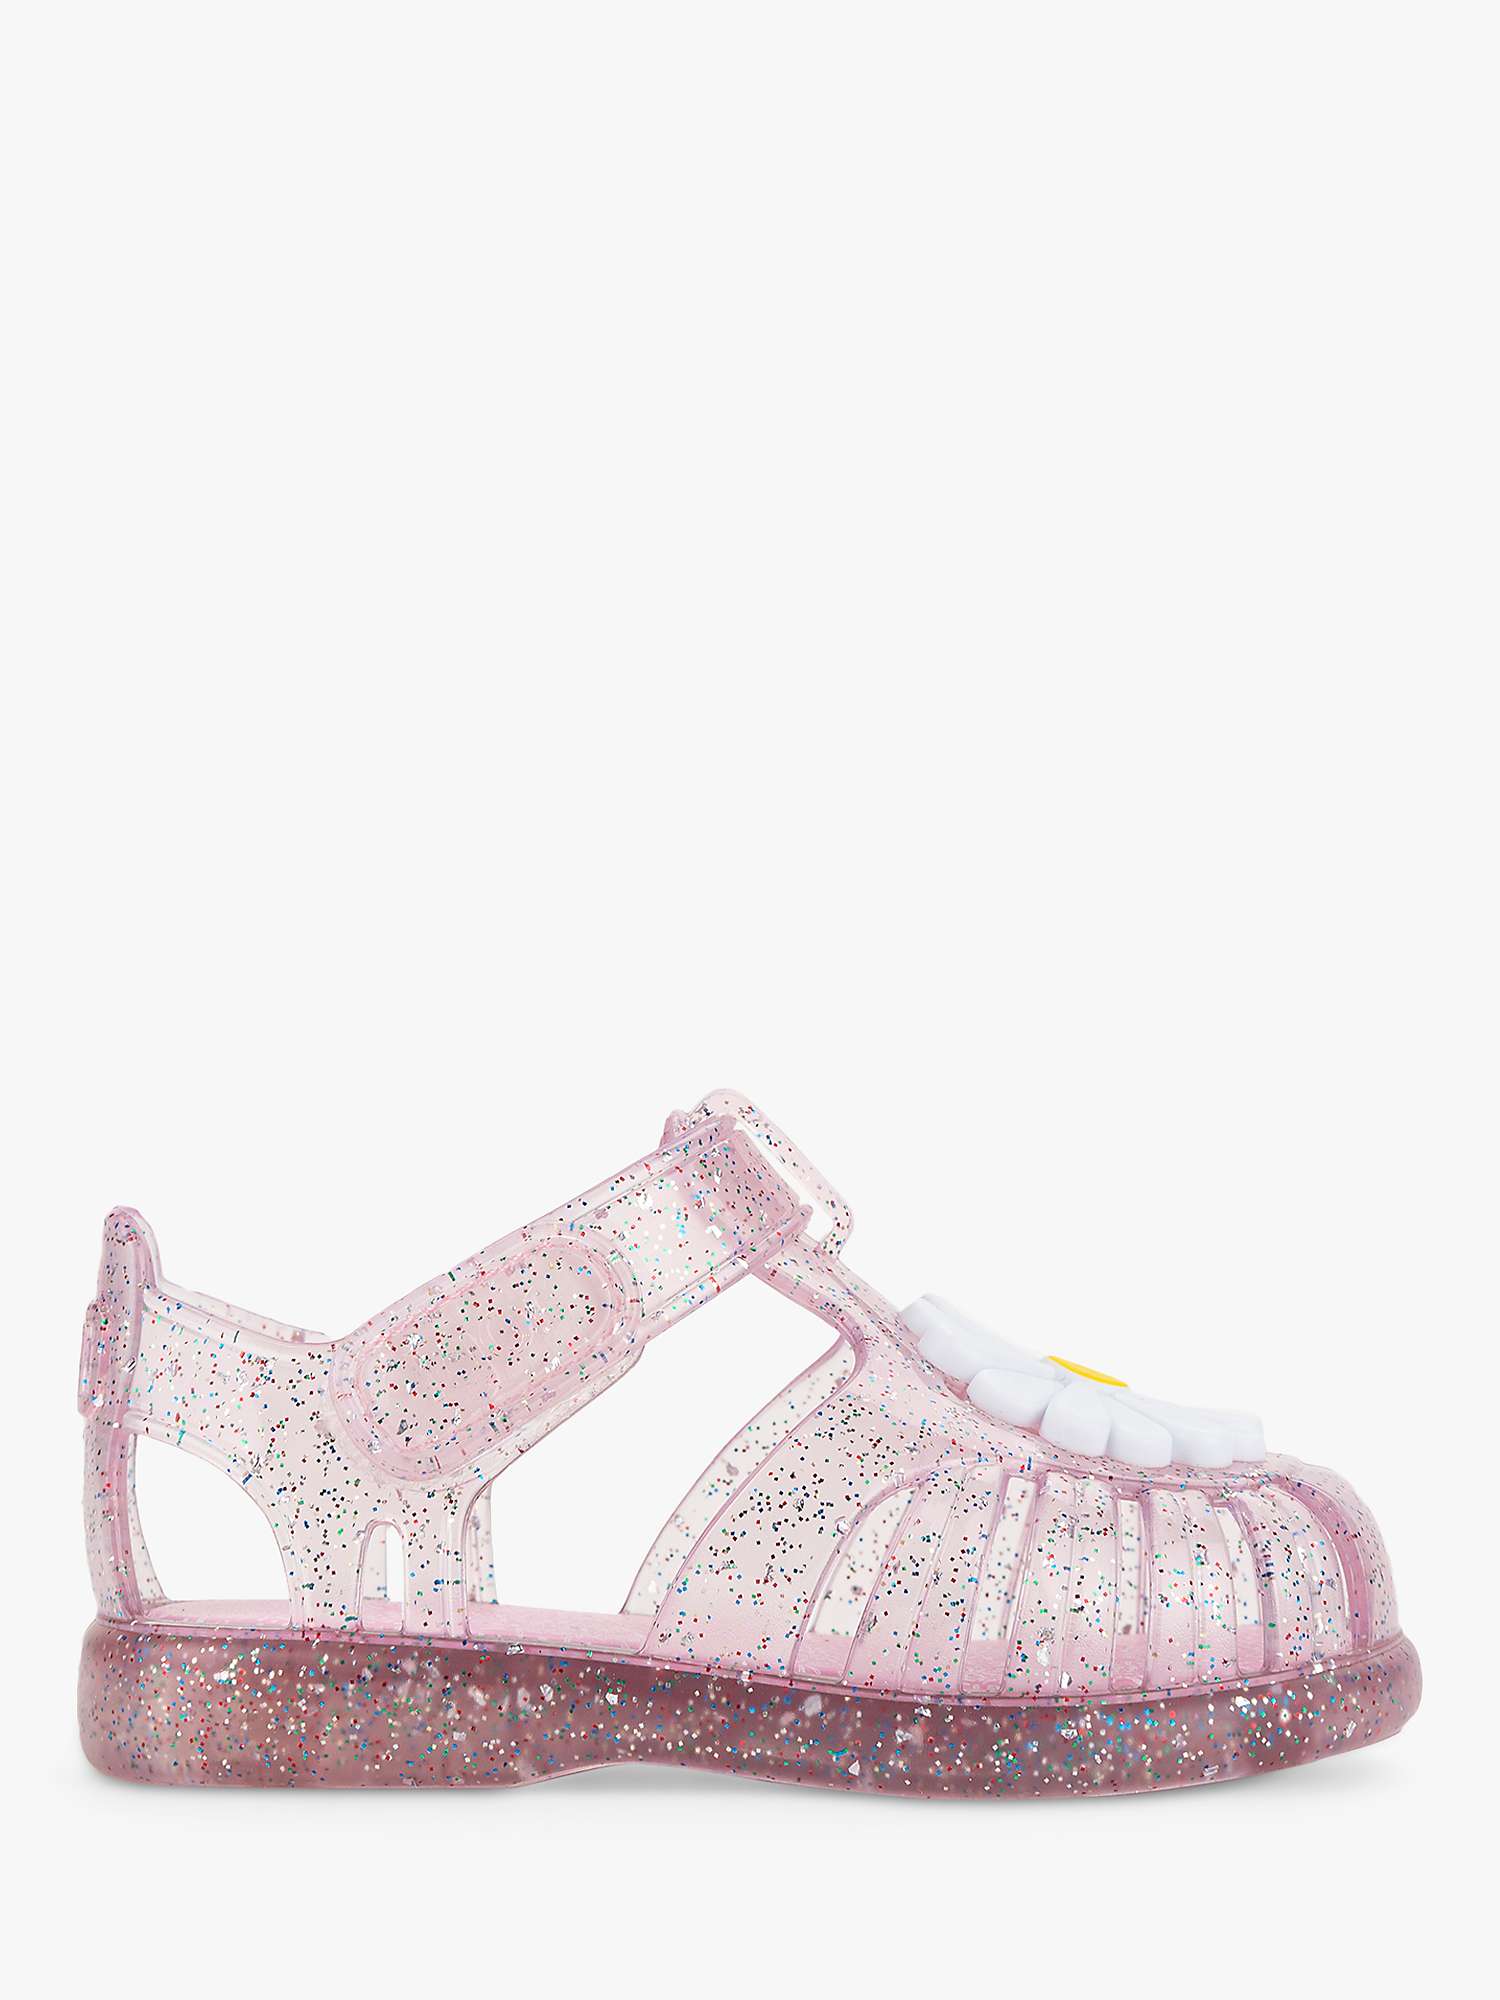 Buy IGOR Kids' Tobby Gloss Glitter Floral Jelly Sandals, Pink Online at johnlewis.com